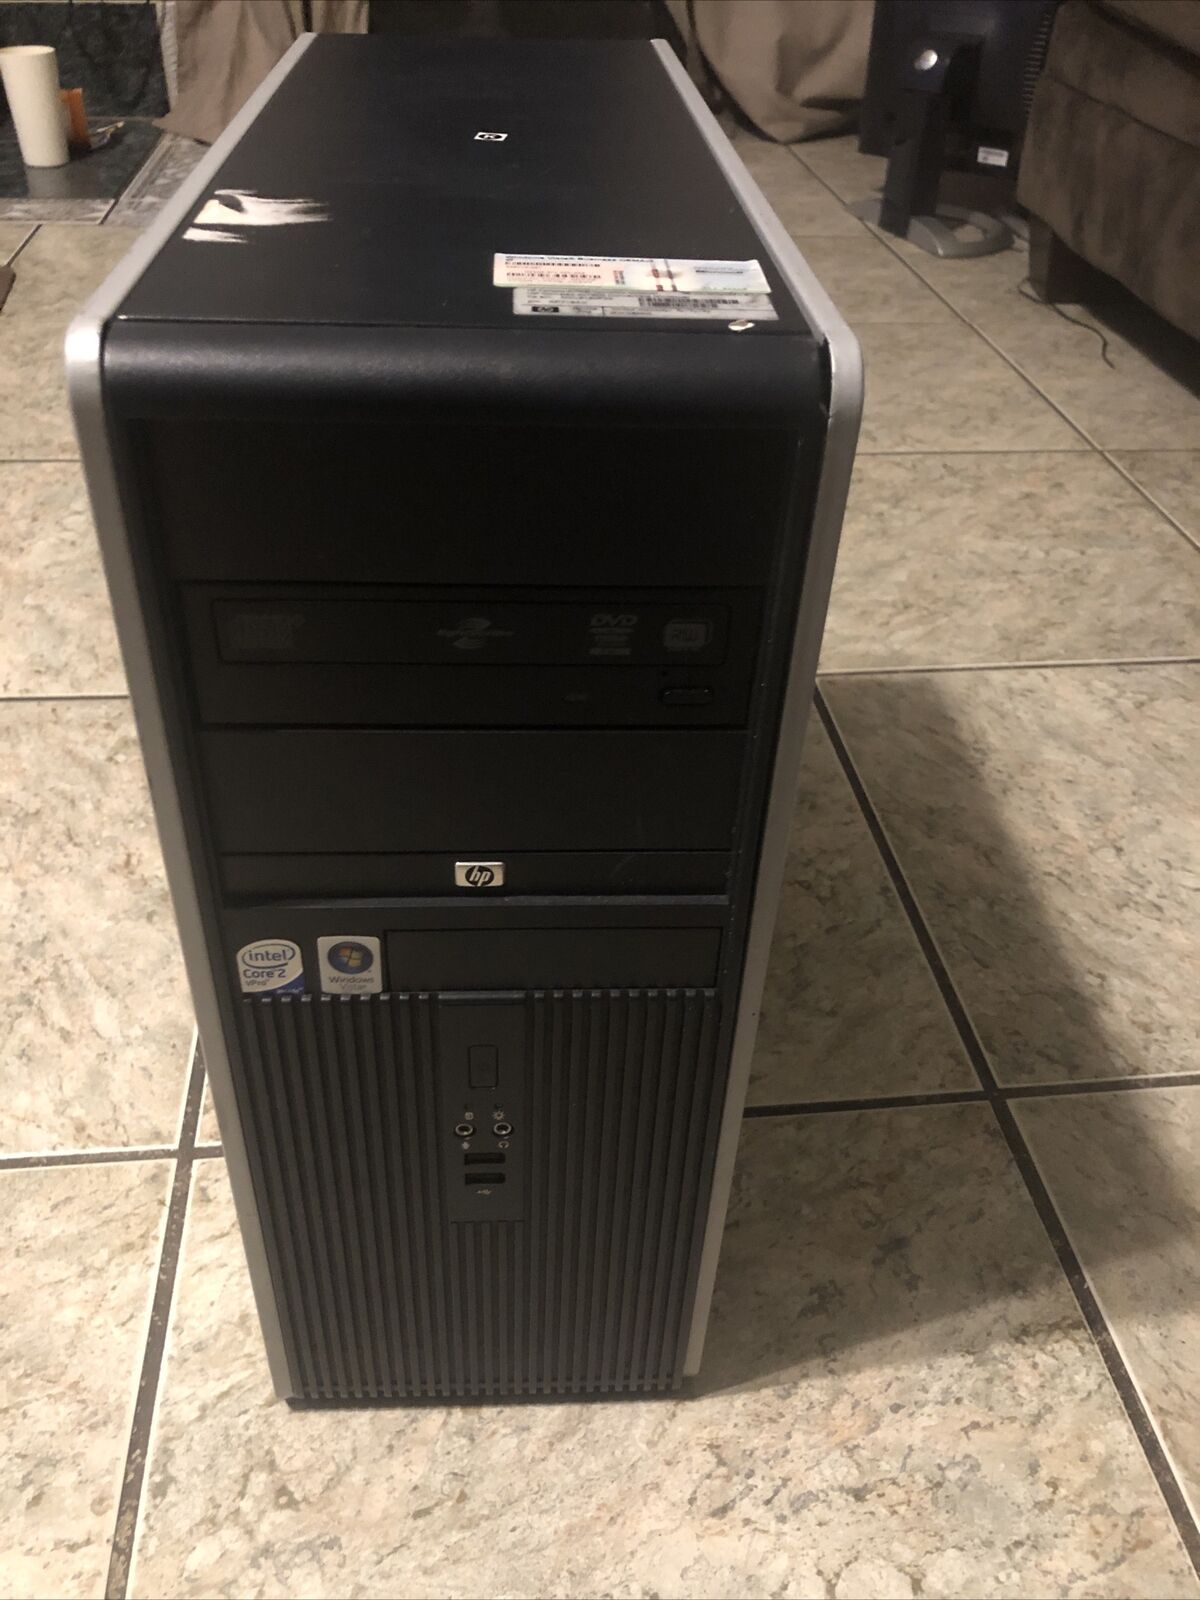 HP Compaq dc7900 Convertible Minitower Not Working It’s As What You See In The P